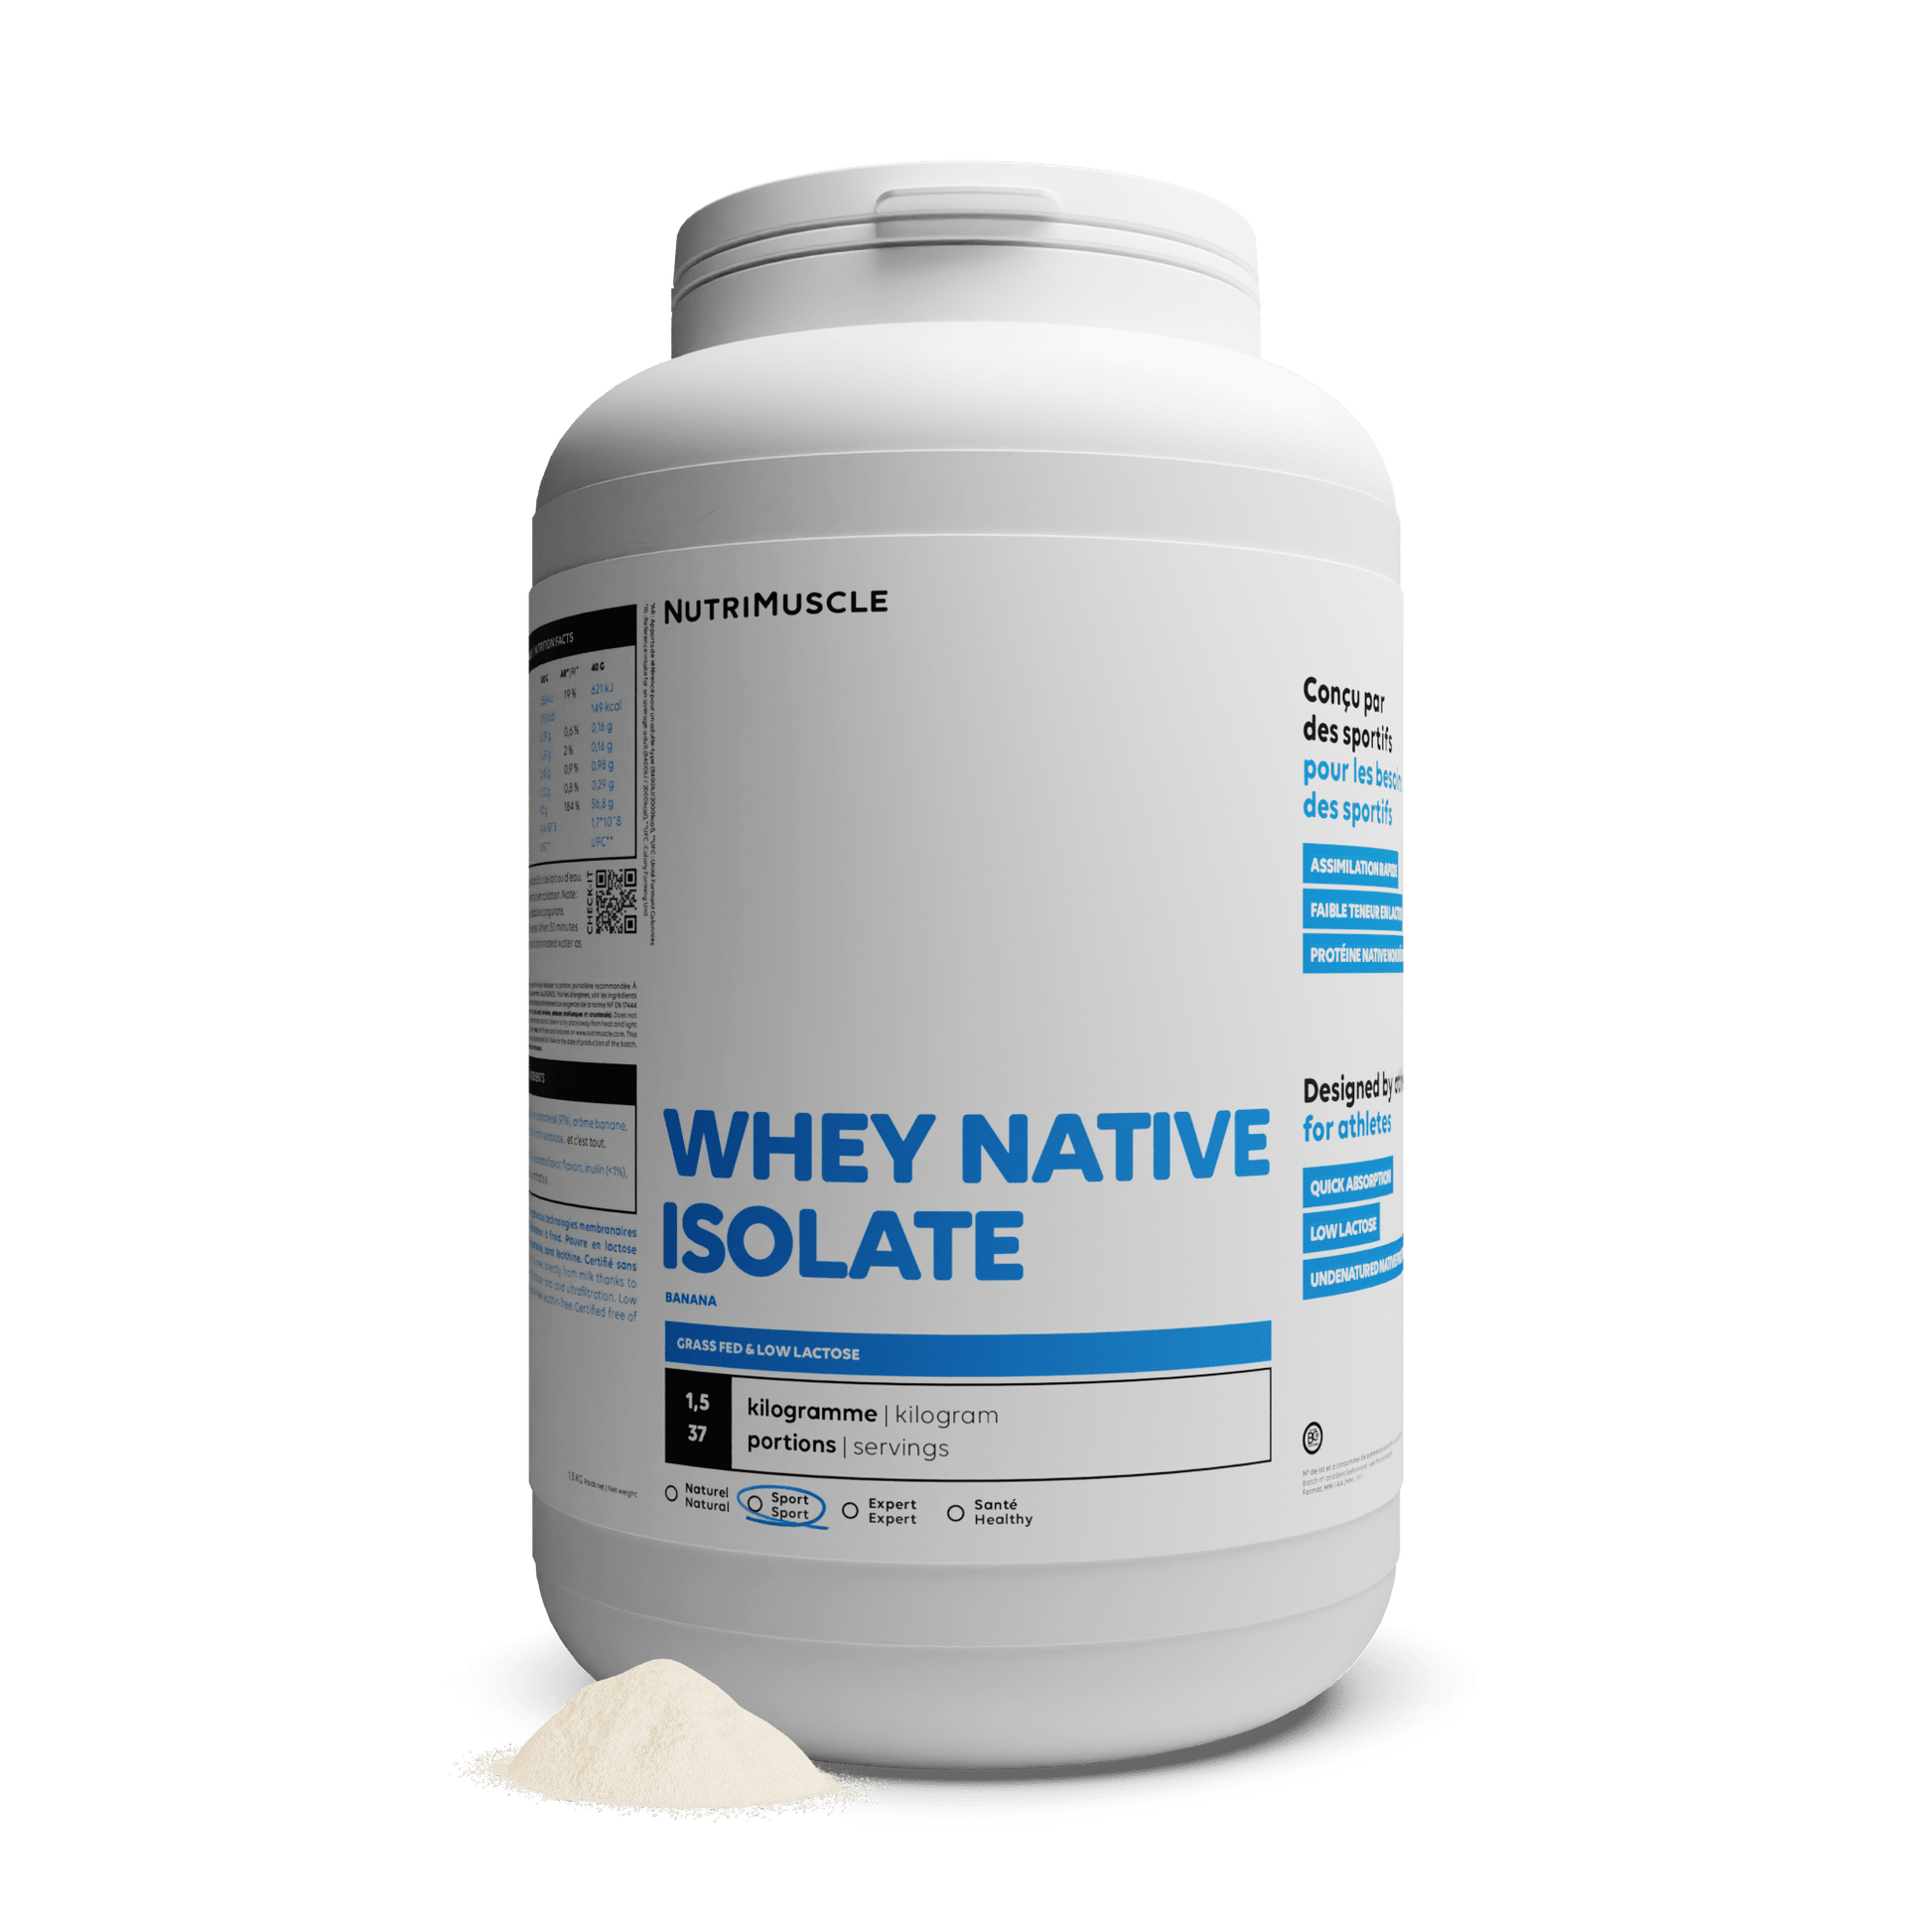 Nutrimuscle Protéines Banane / 1.50 kg Whey Native Isolate (Low lactose)